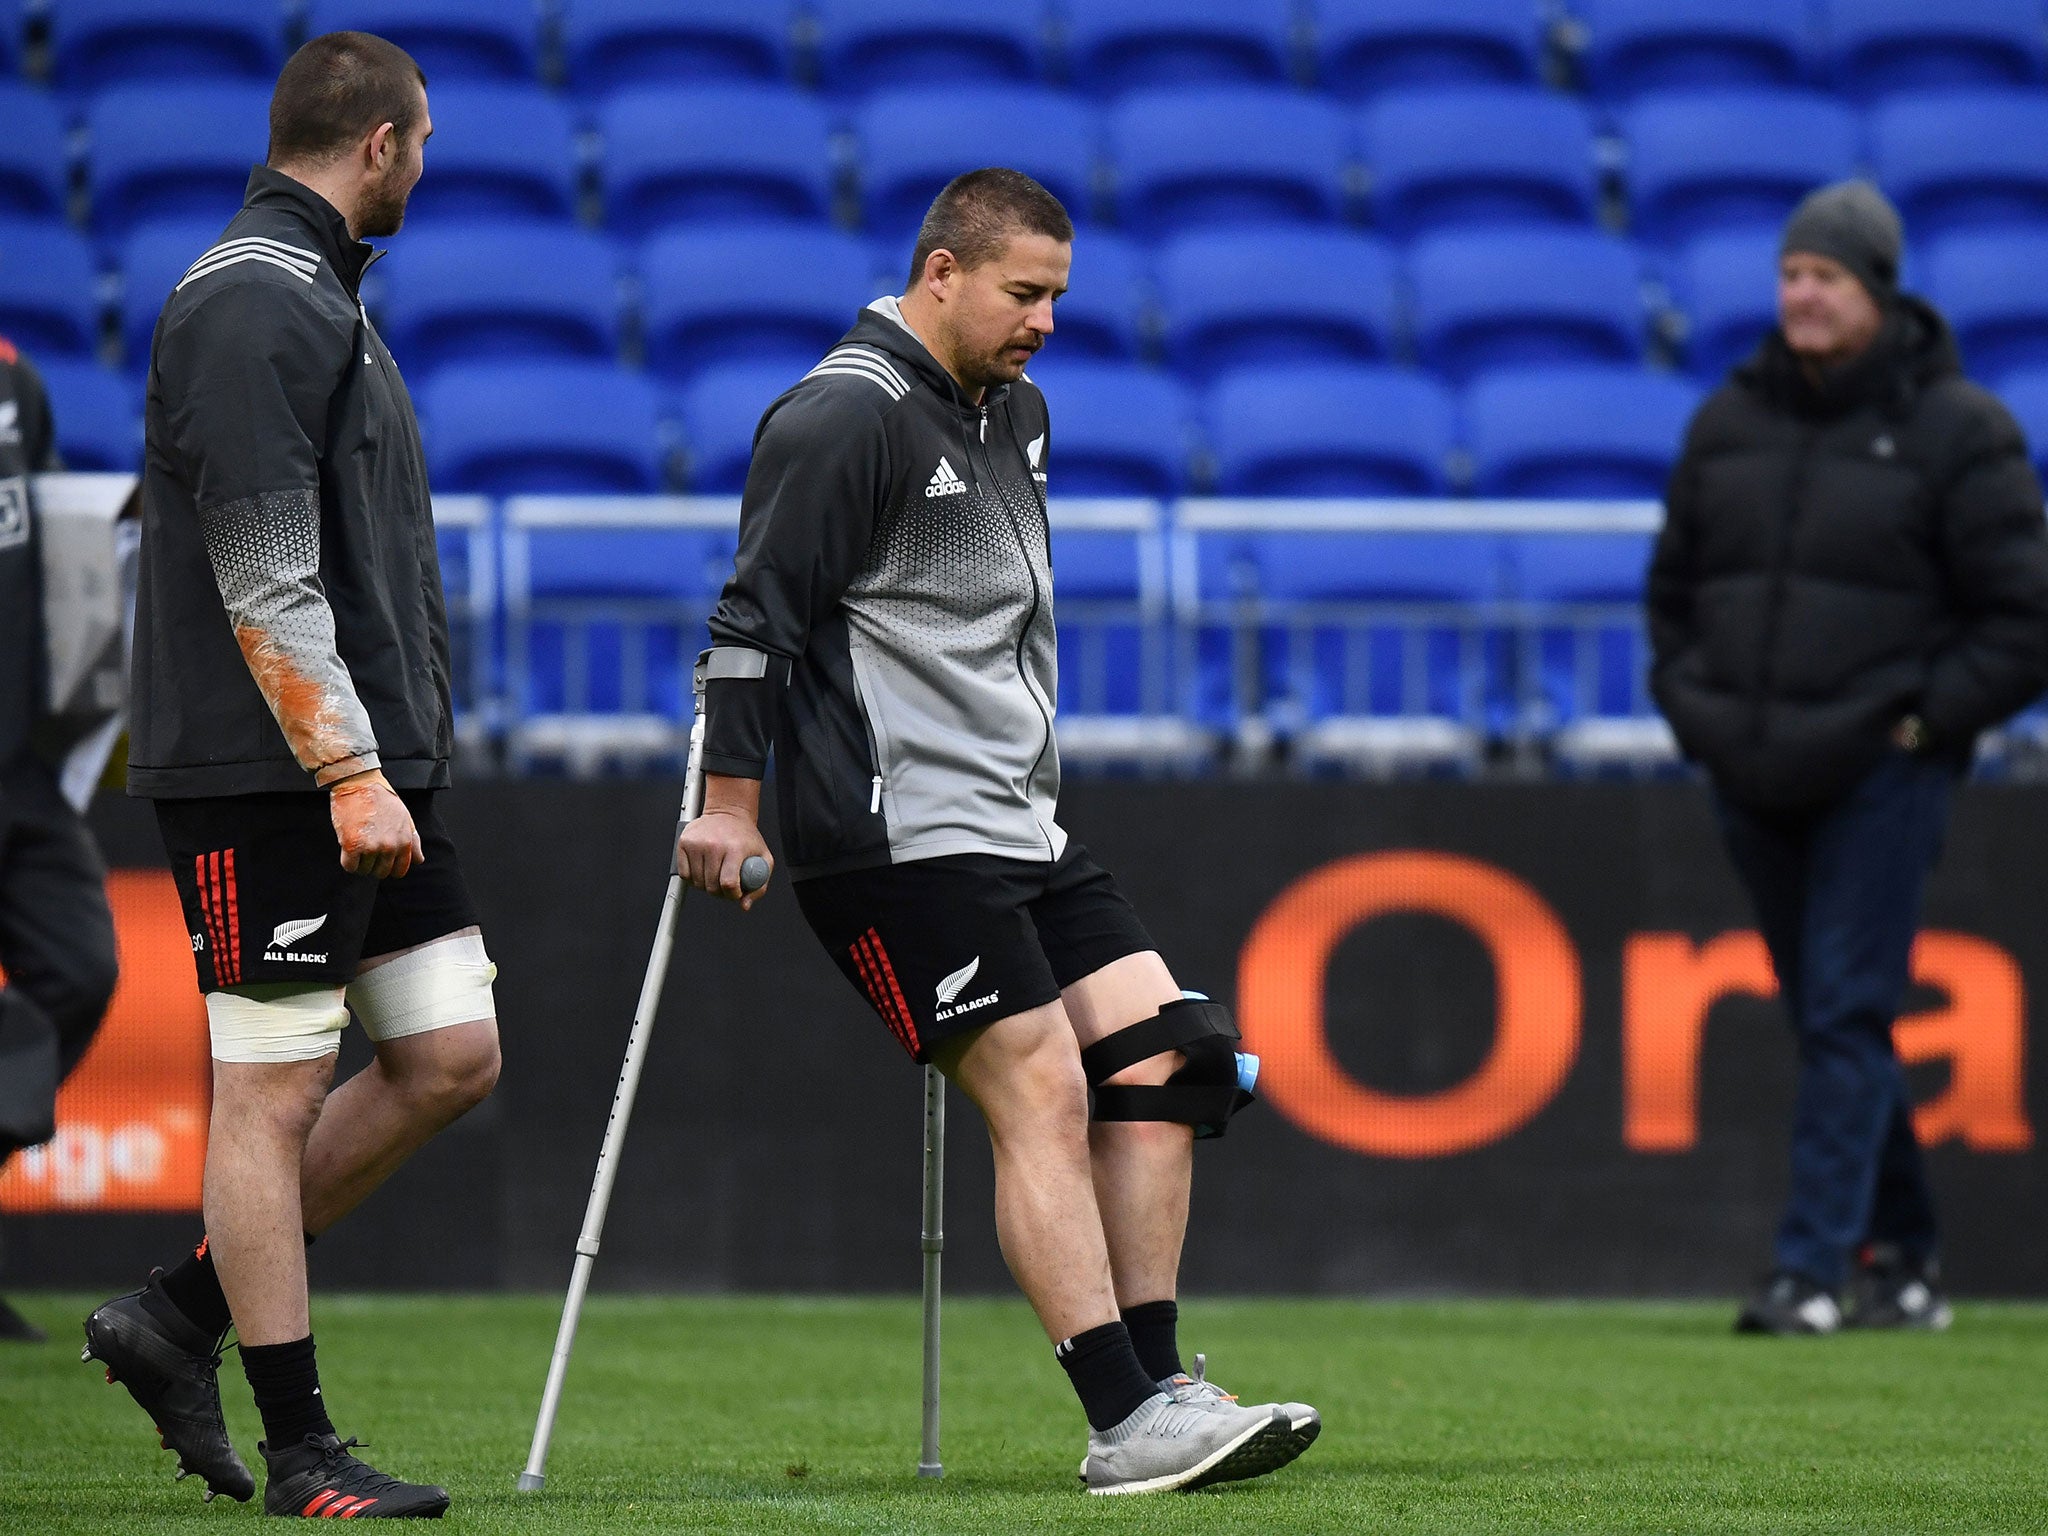 Coles ruptured knee ligaments last November and missed the entire Super Rugby season